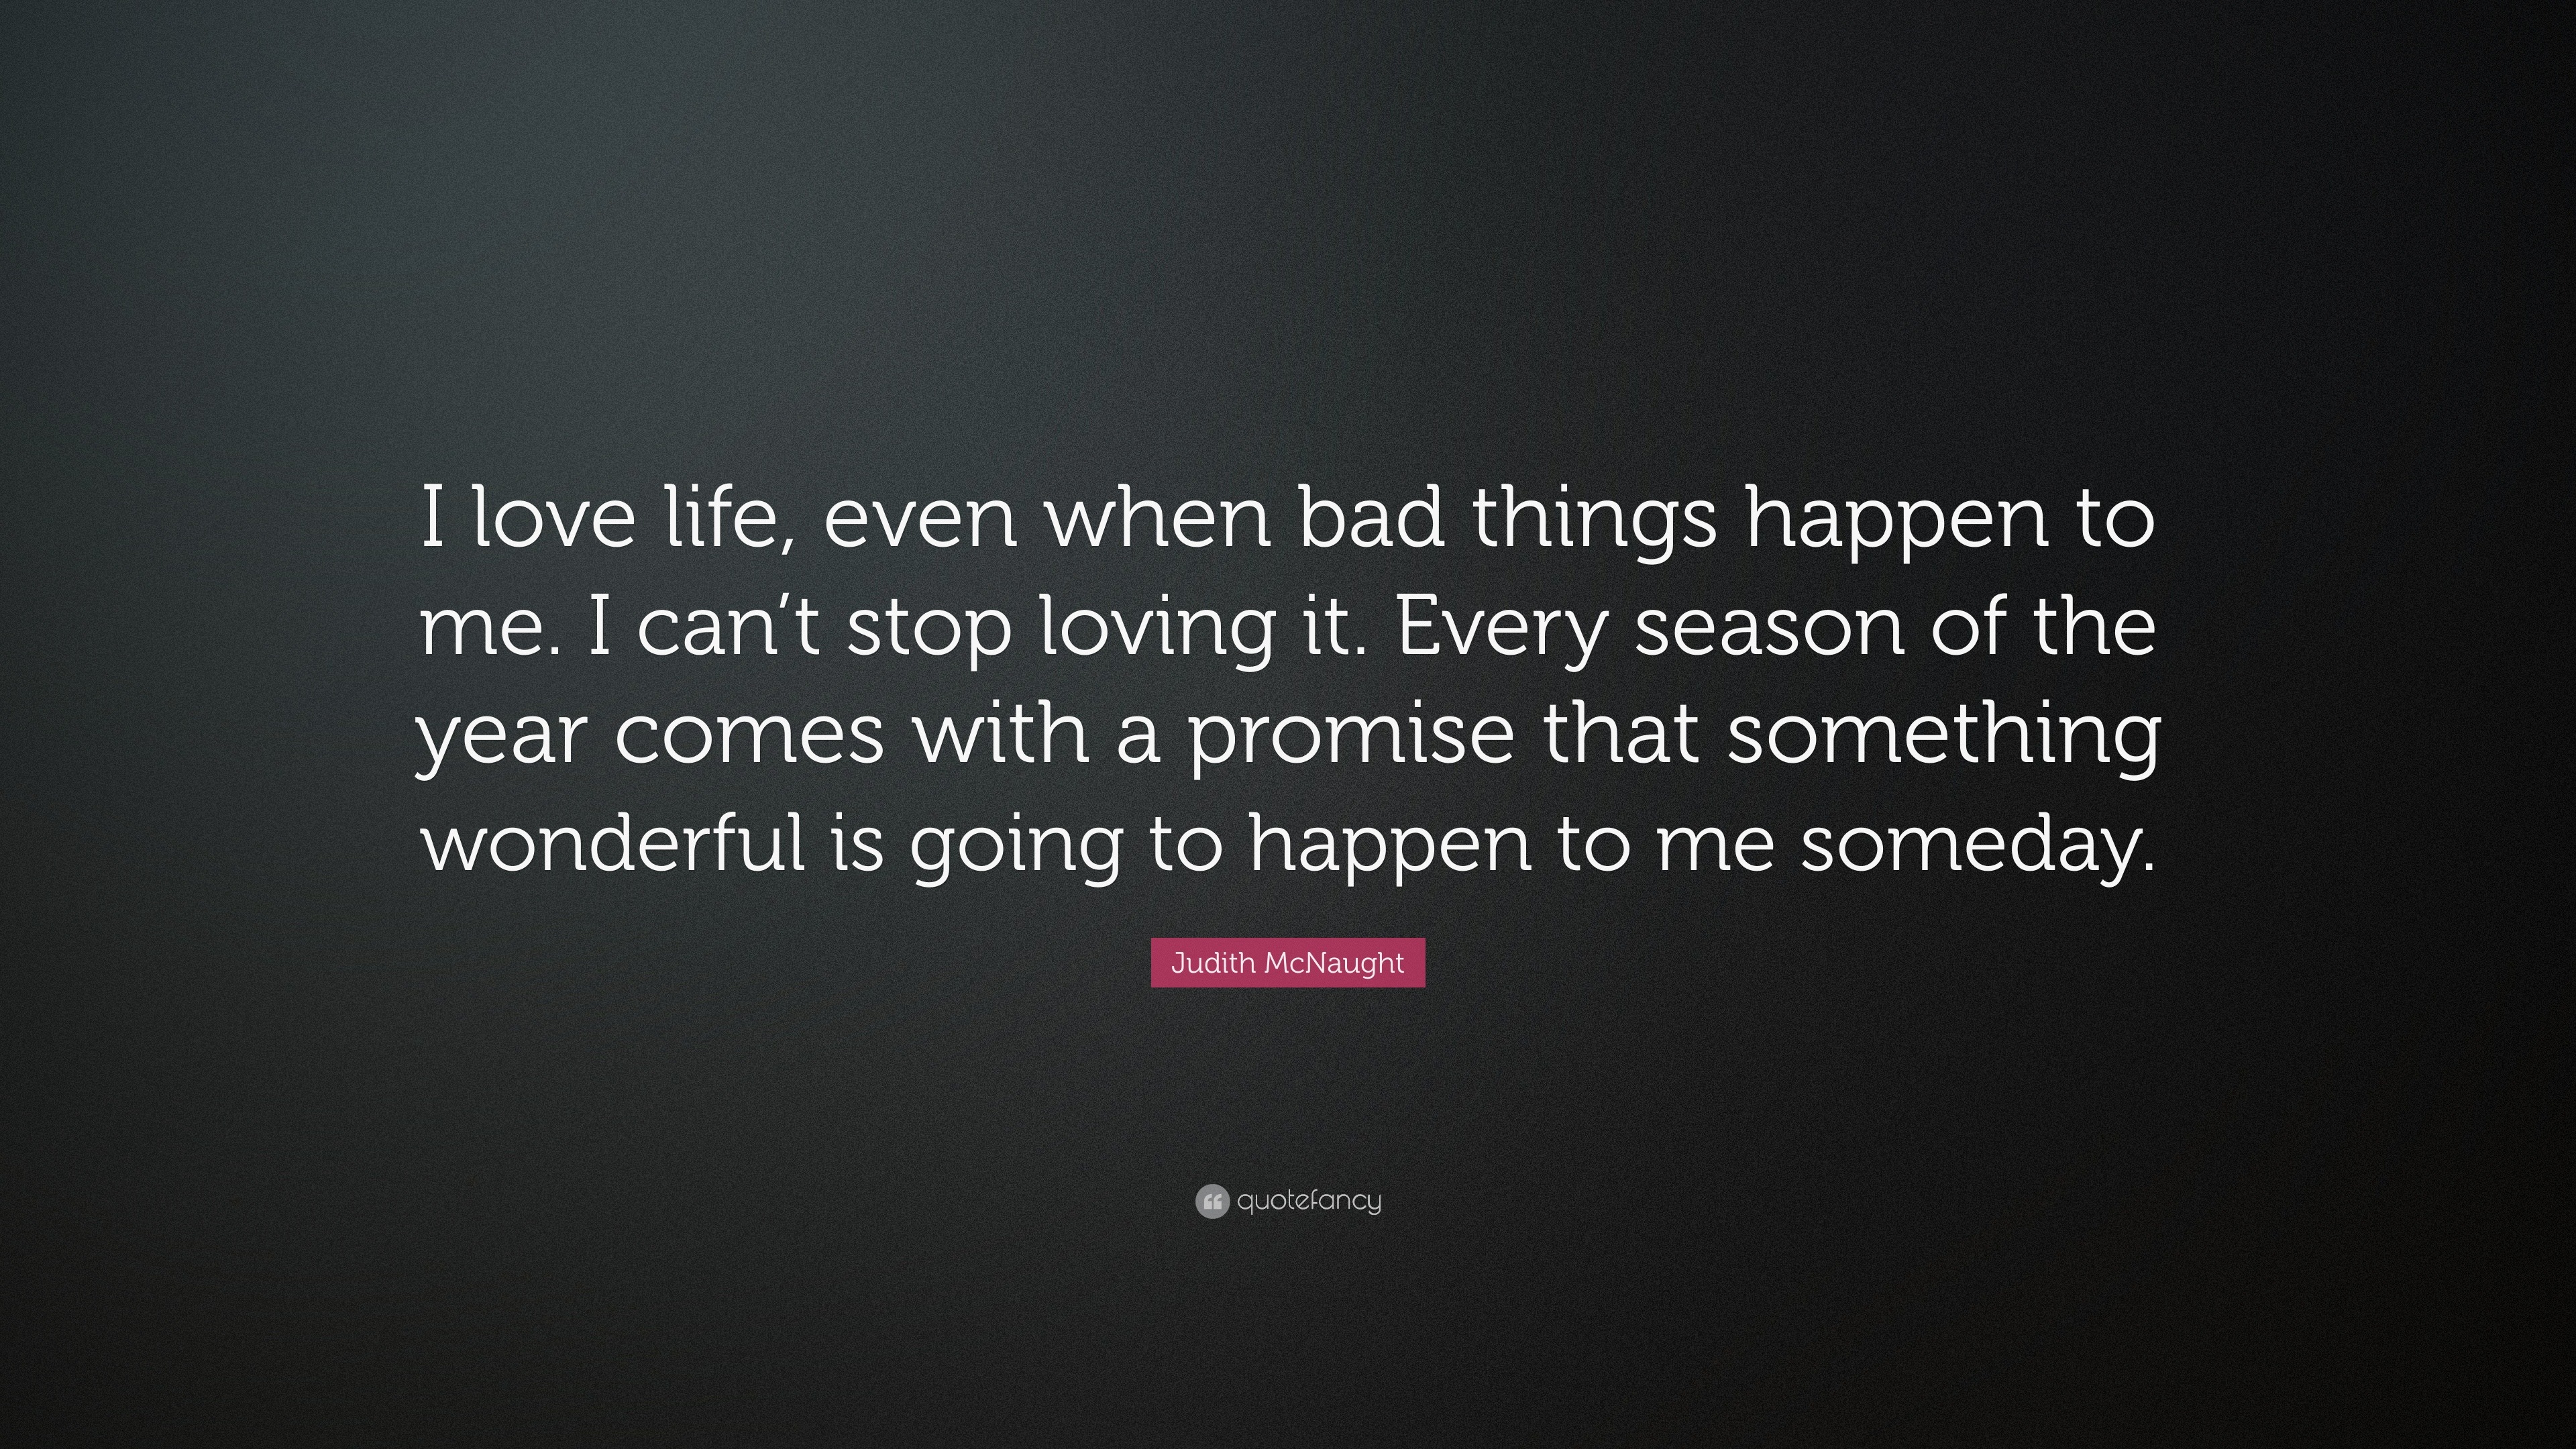 Judith McNaught Quote “I love life even when bad things happen to me